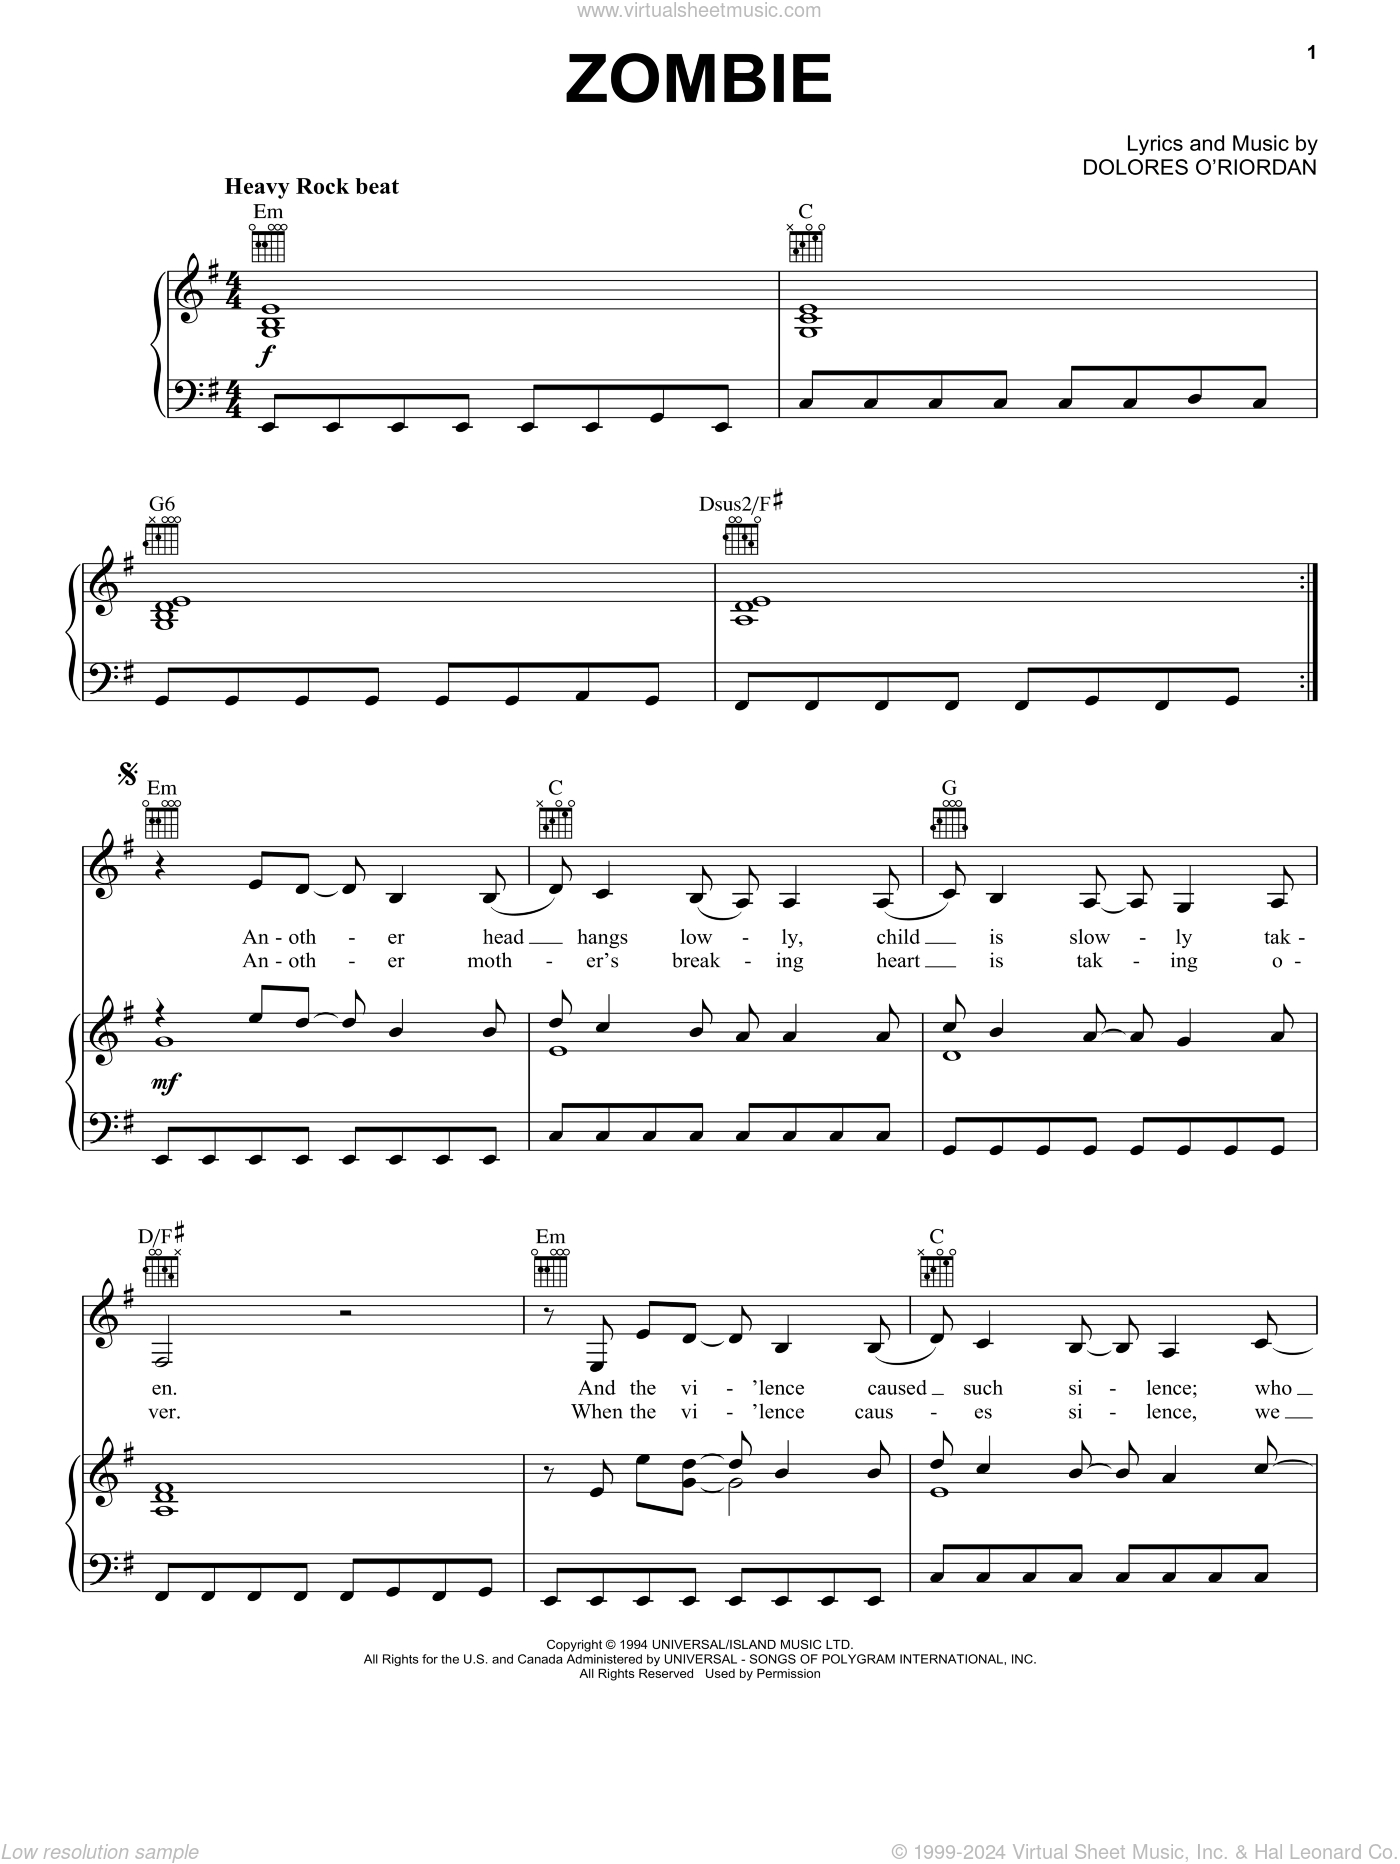 The Cranberries - Zombie  Guitar chords and lyrics, Learn guitar songs,  Guitar tutorials songs